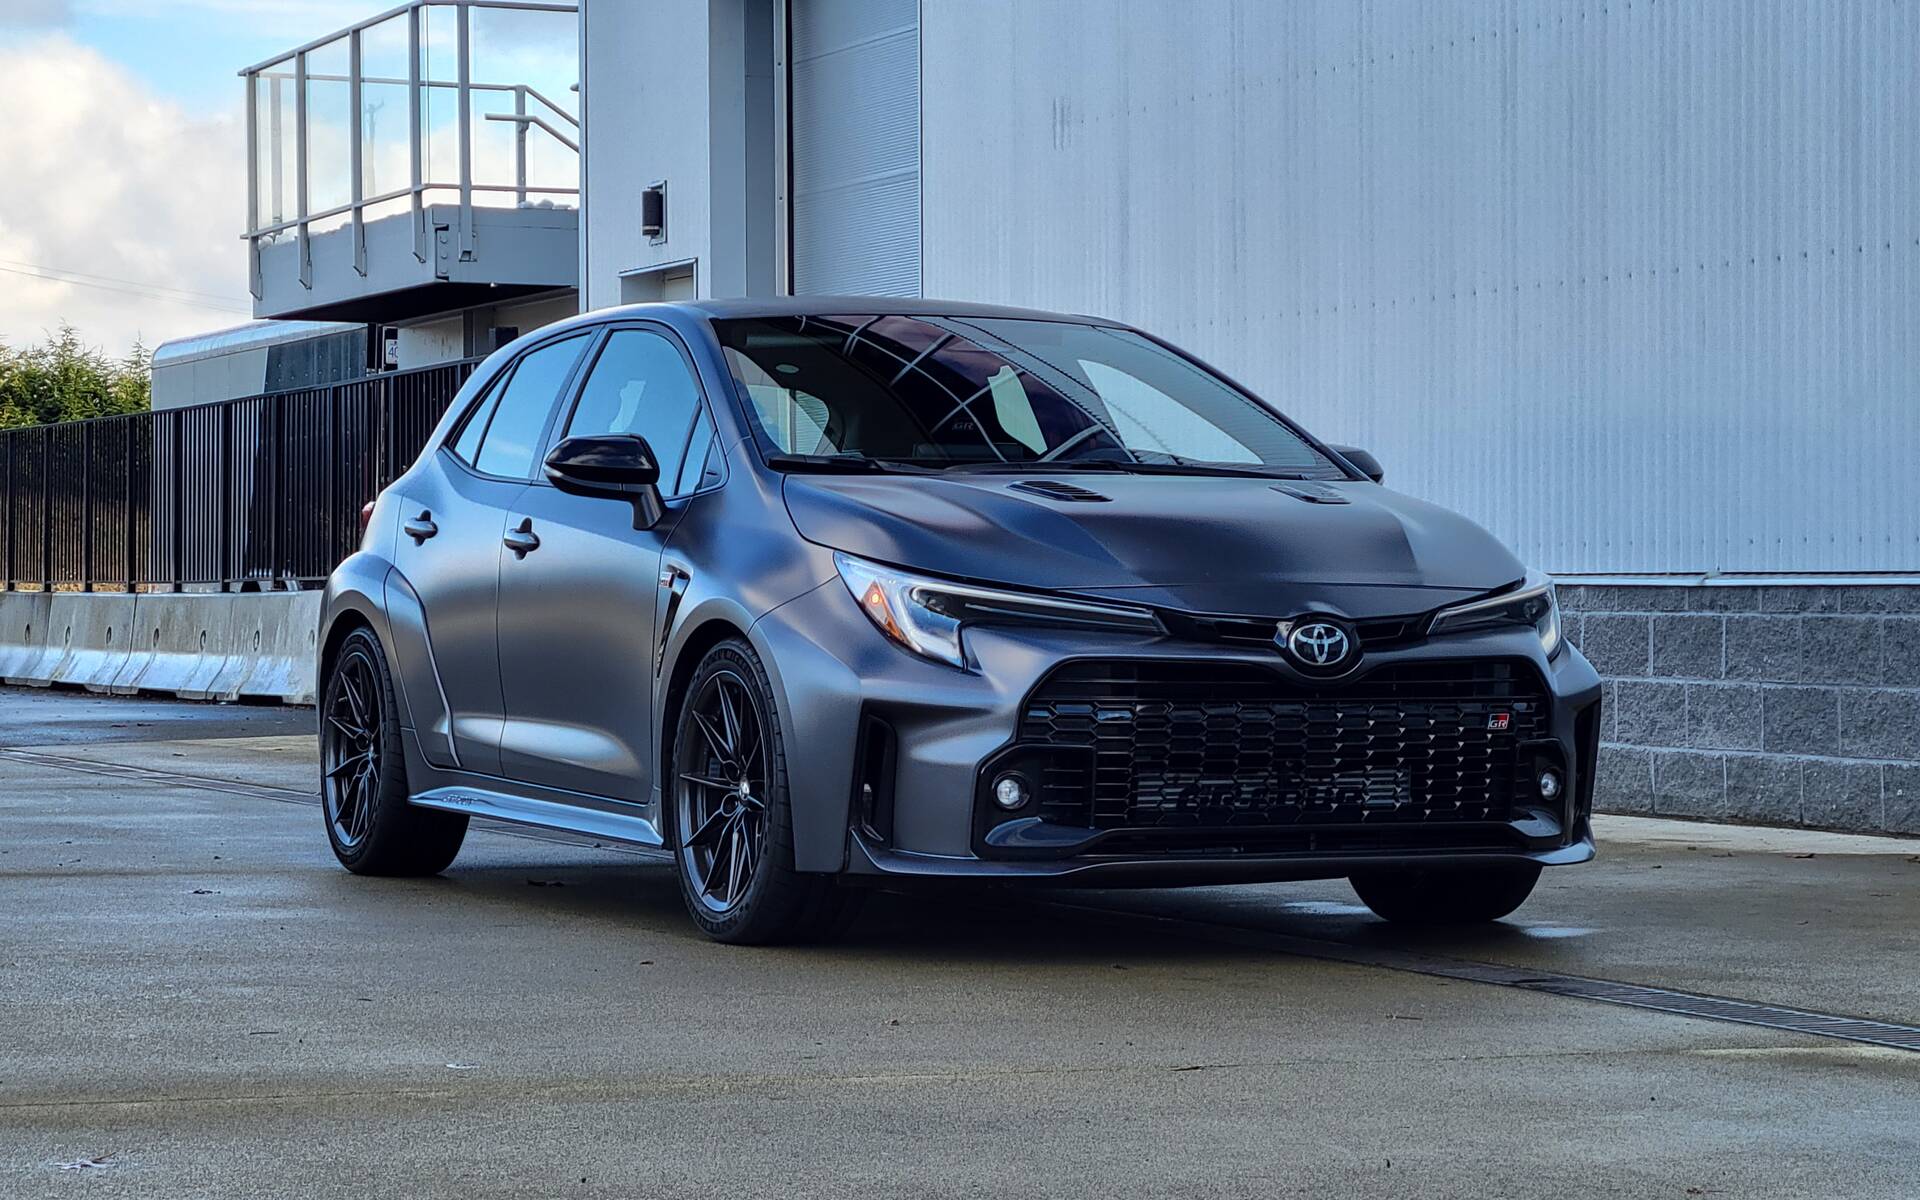 New 2023 Toyota Corolla GR leaked before official reveal